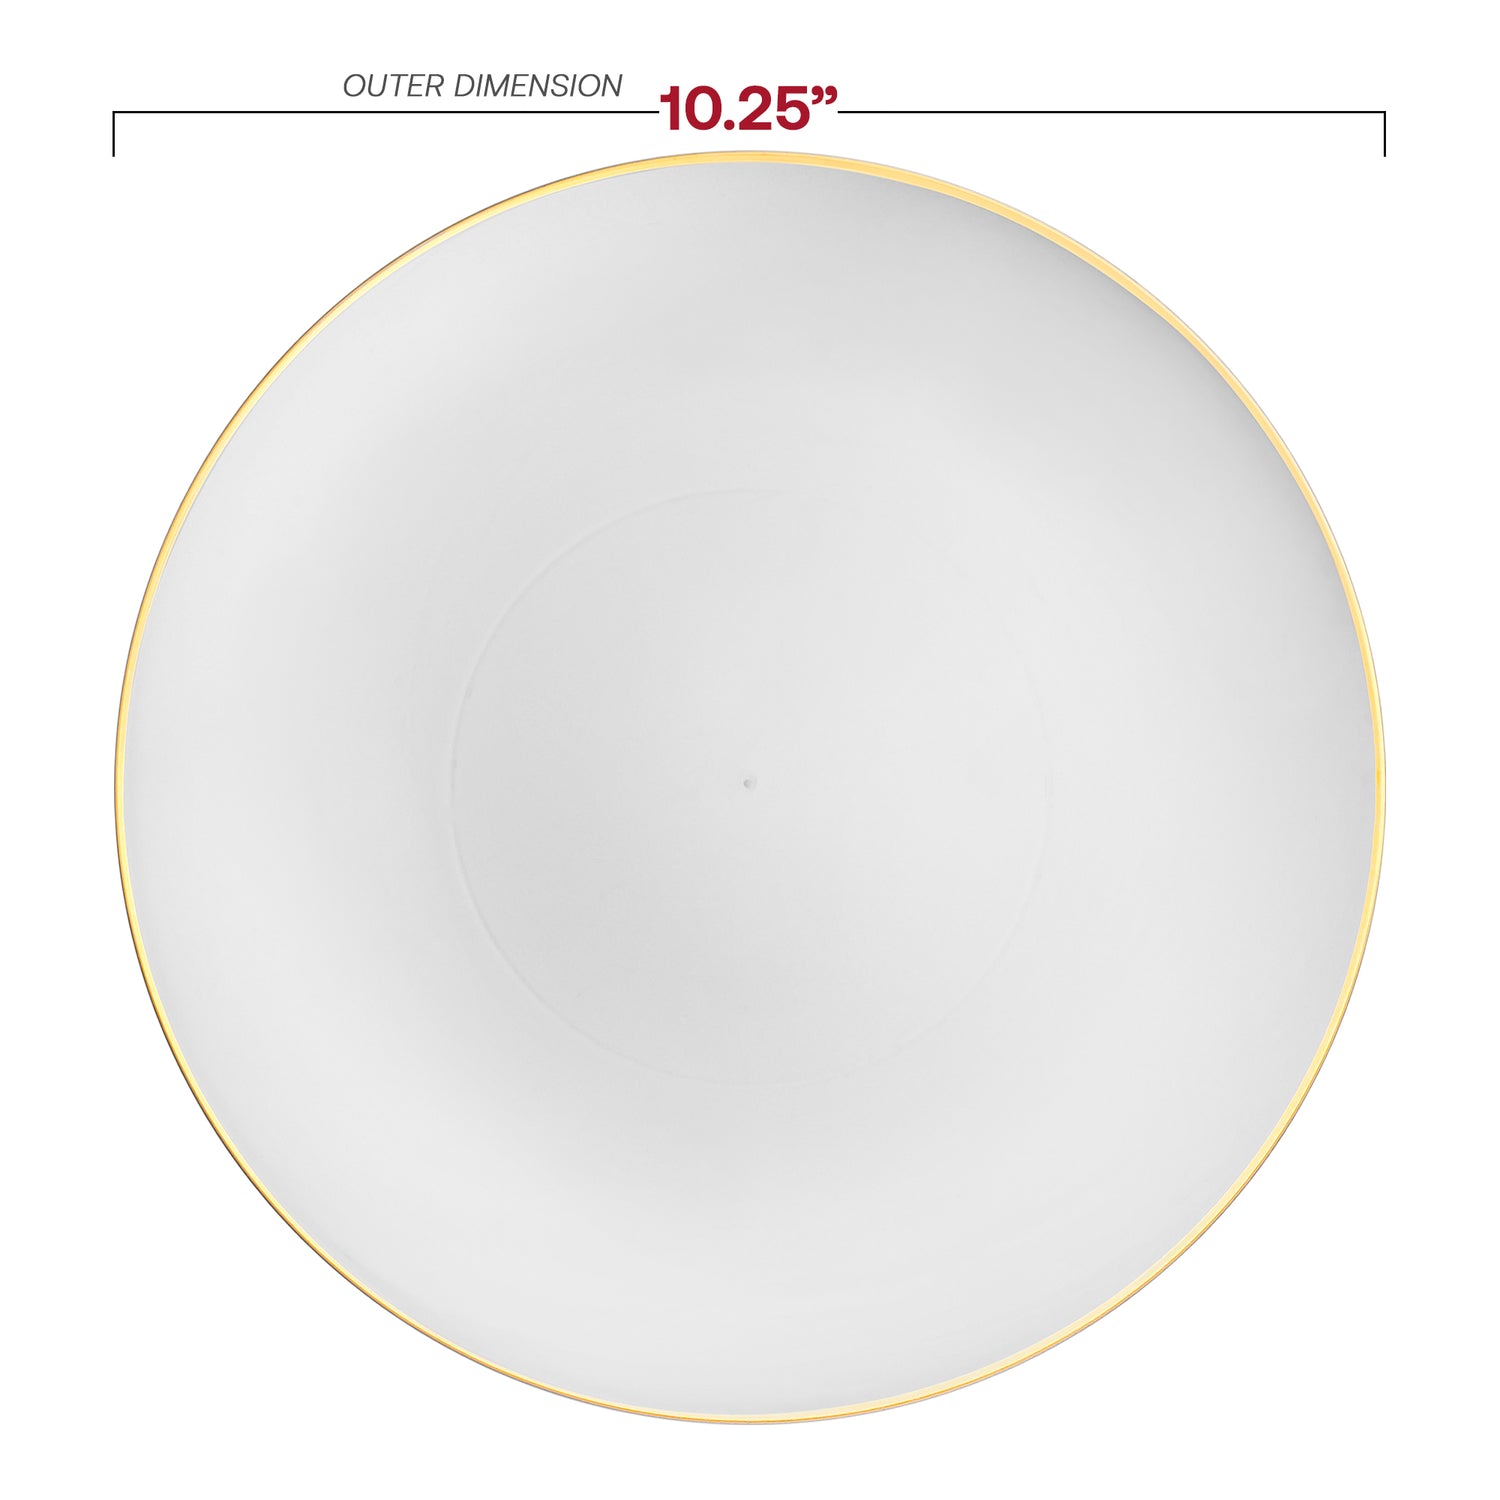 White with Gold Rim Organic Round Disposable Plastic Dinner Plates (10.25") Dimension | The Kaya Collection